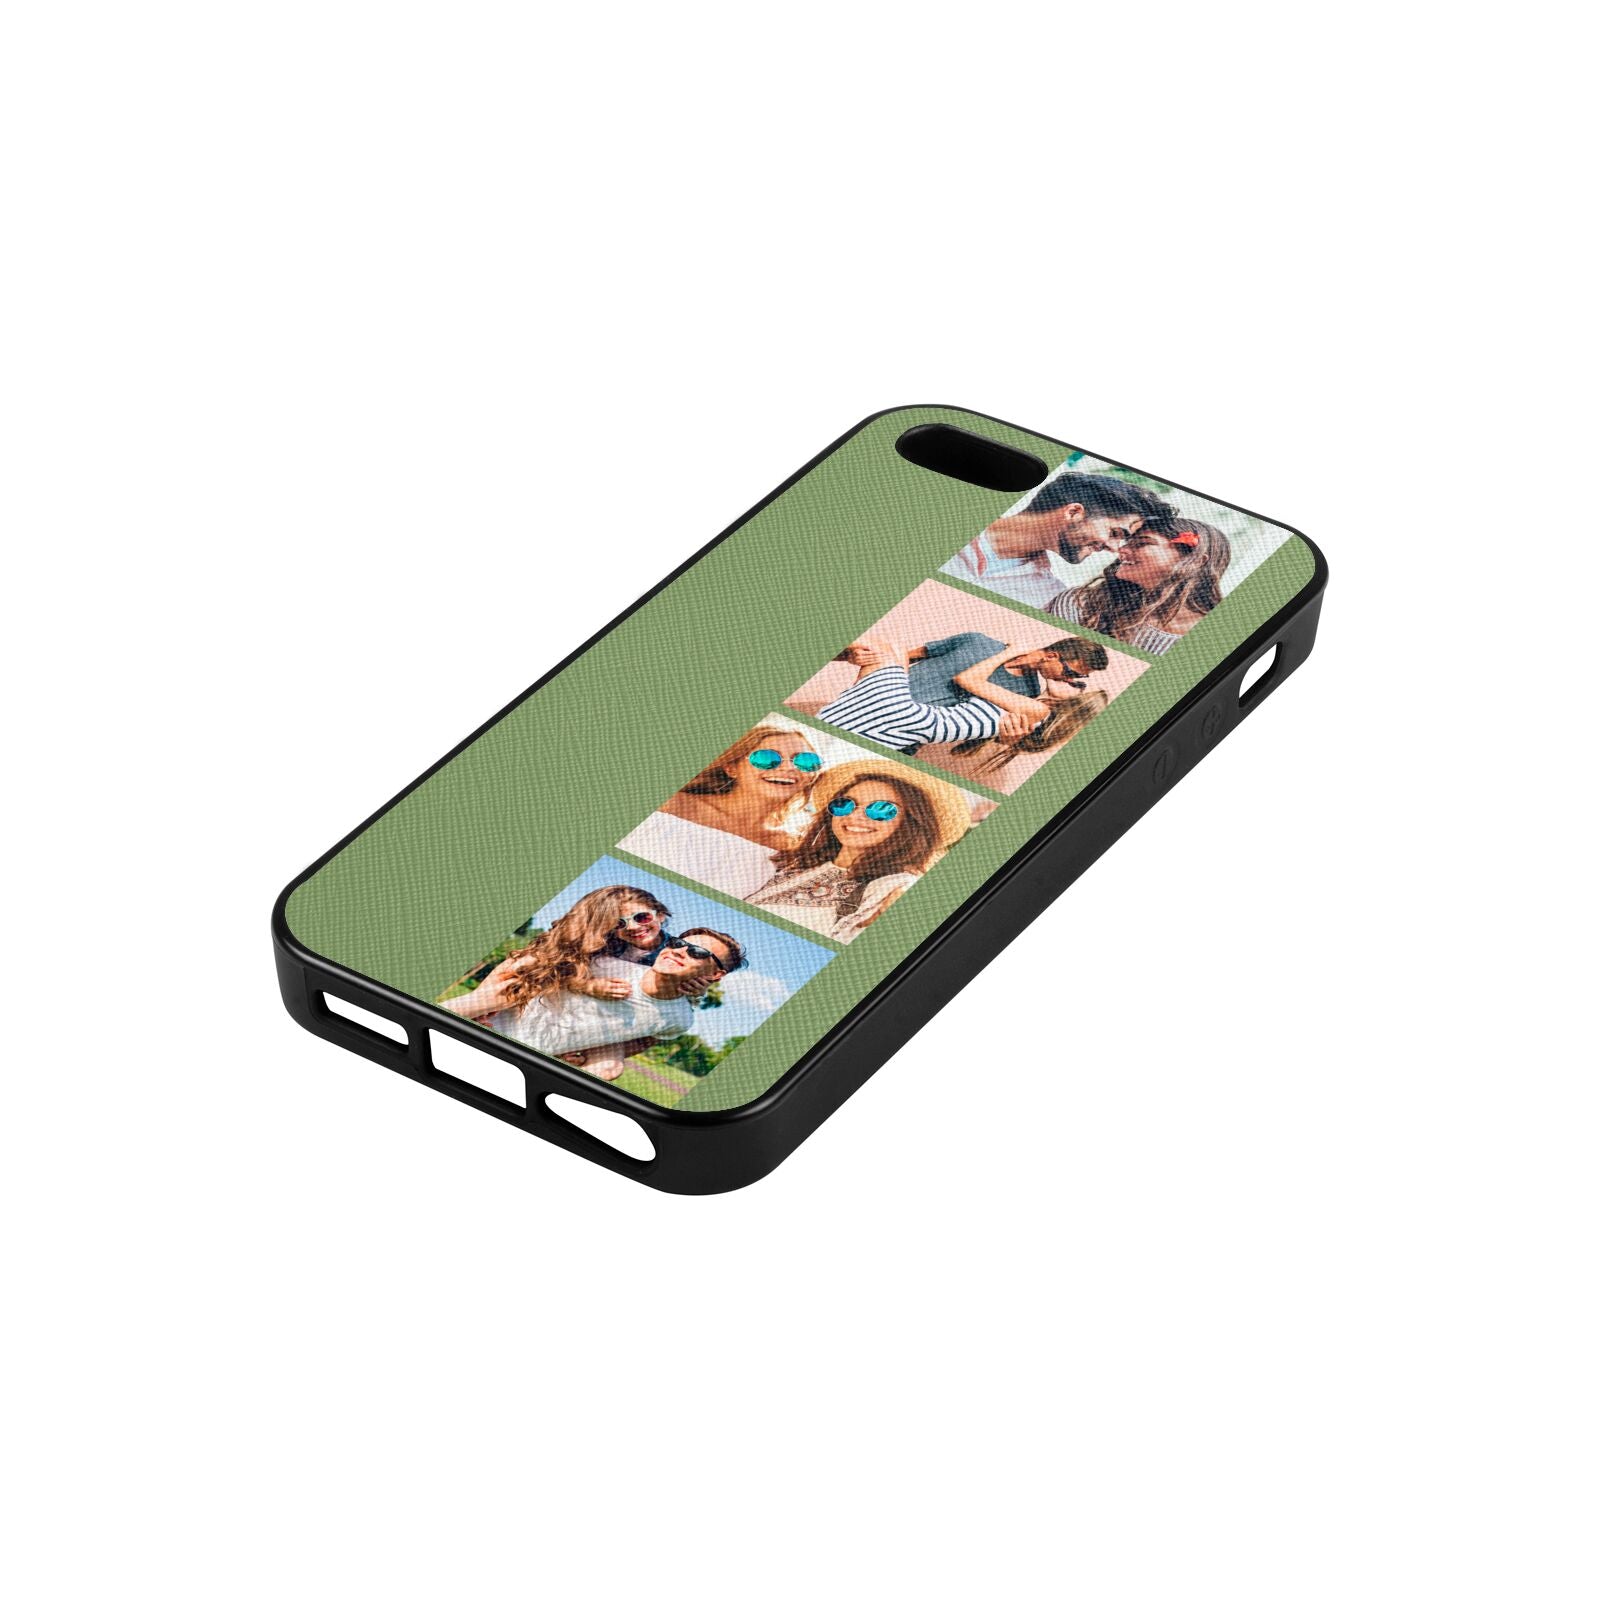 Photo Strip Montage Upload Lime Saffiano Leather iPhone 5 Case Side Angle